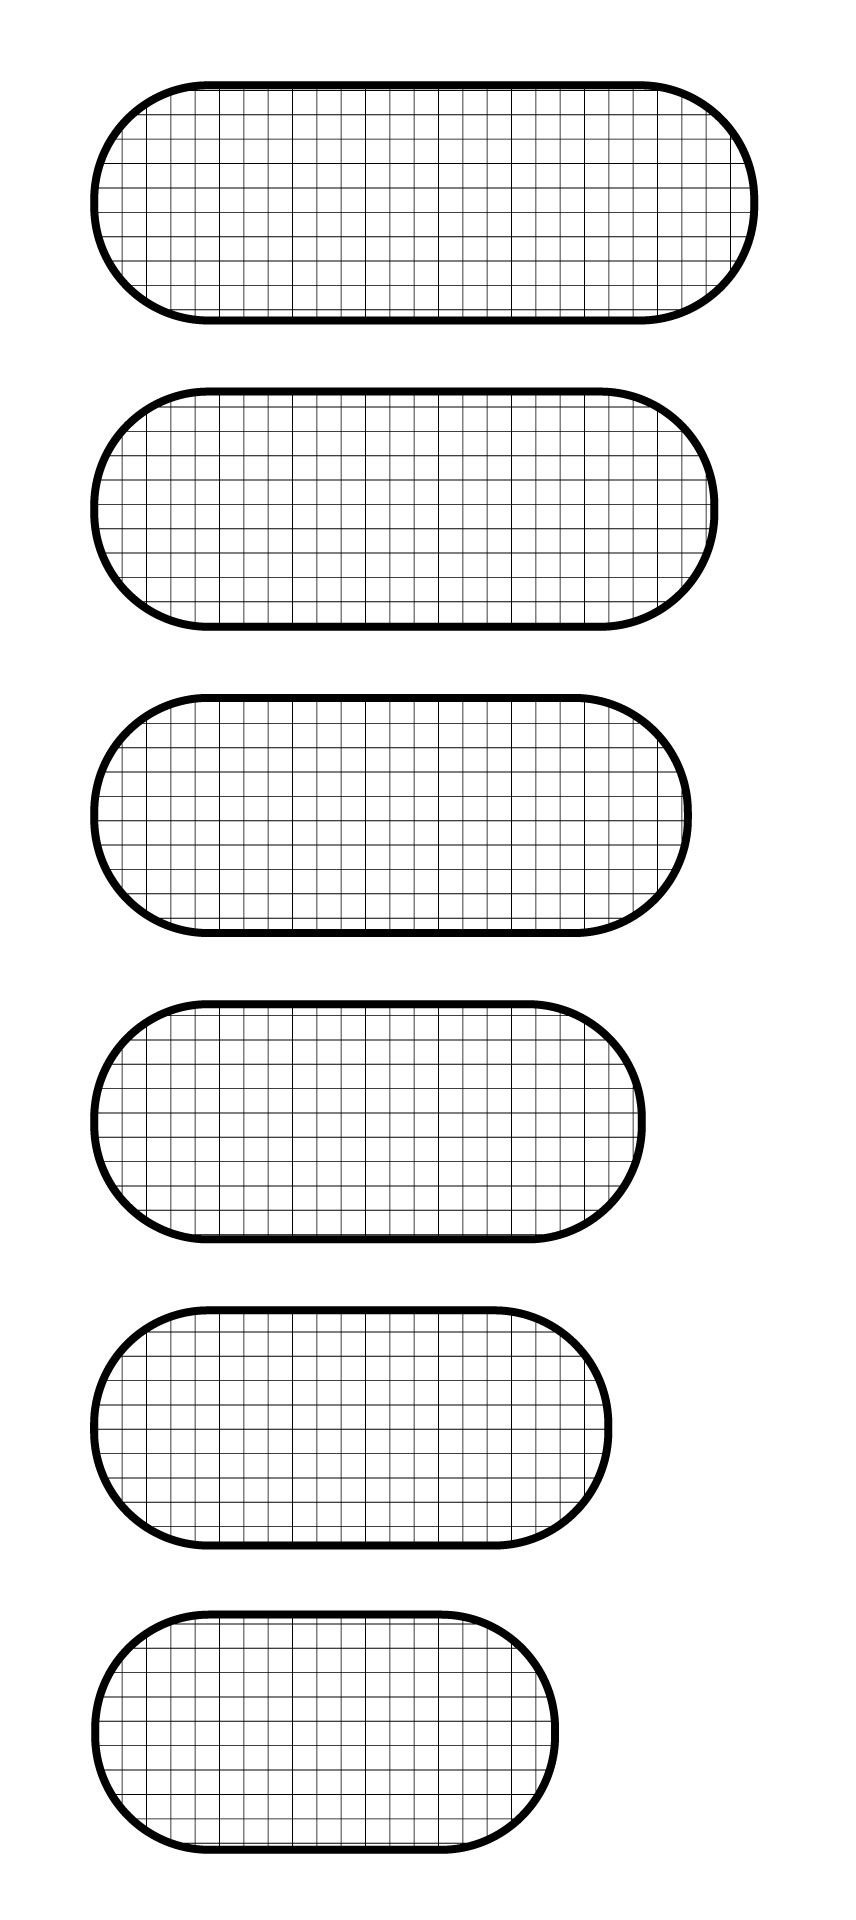 Fischbach’s spectacle frame pad patterns (inspired by Rutrle, 2001).